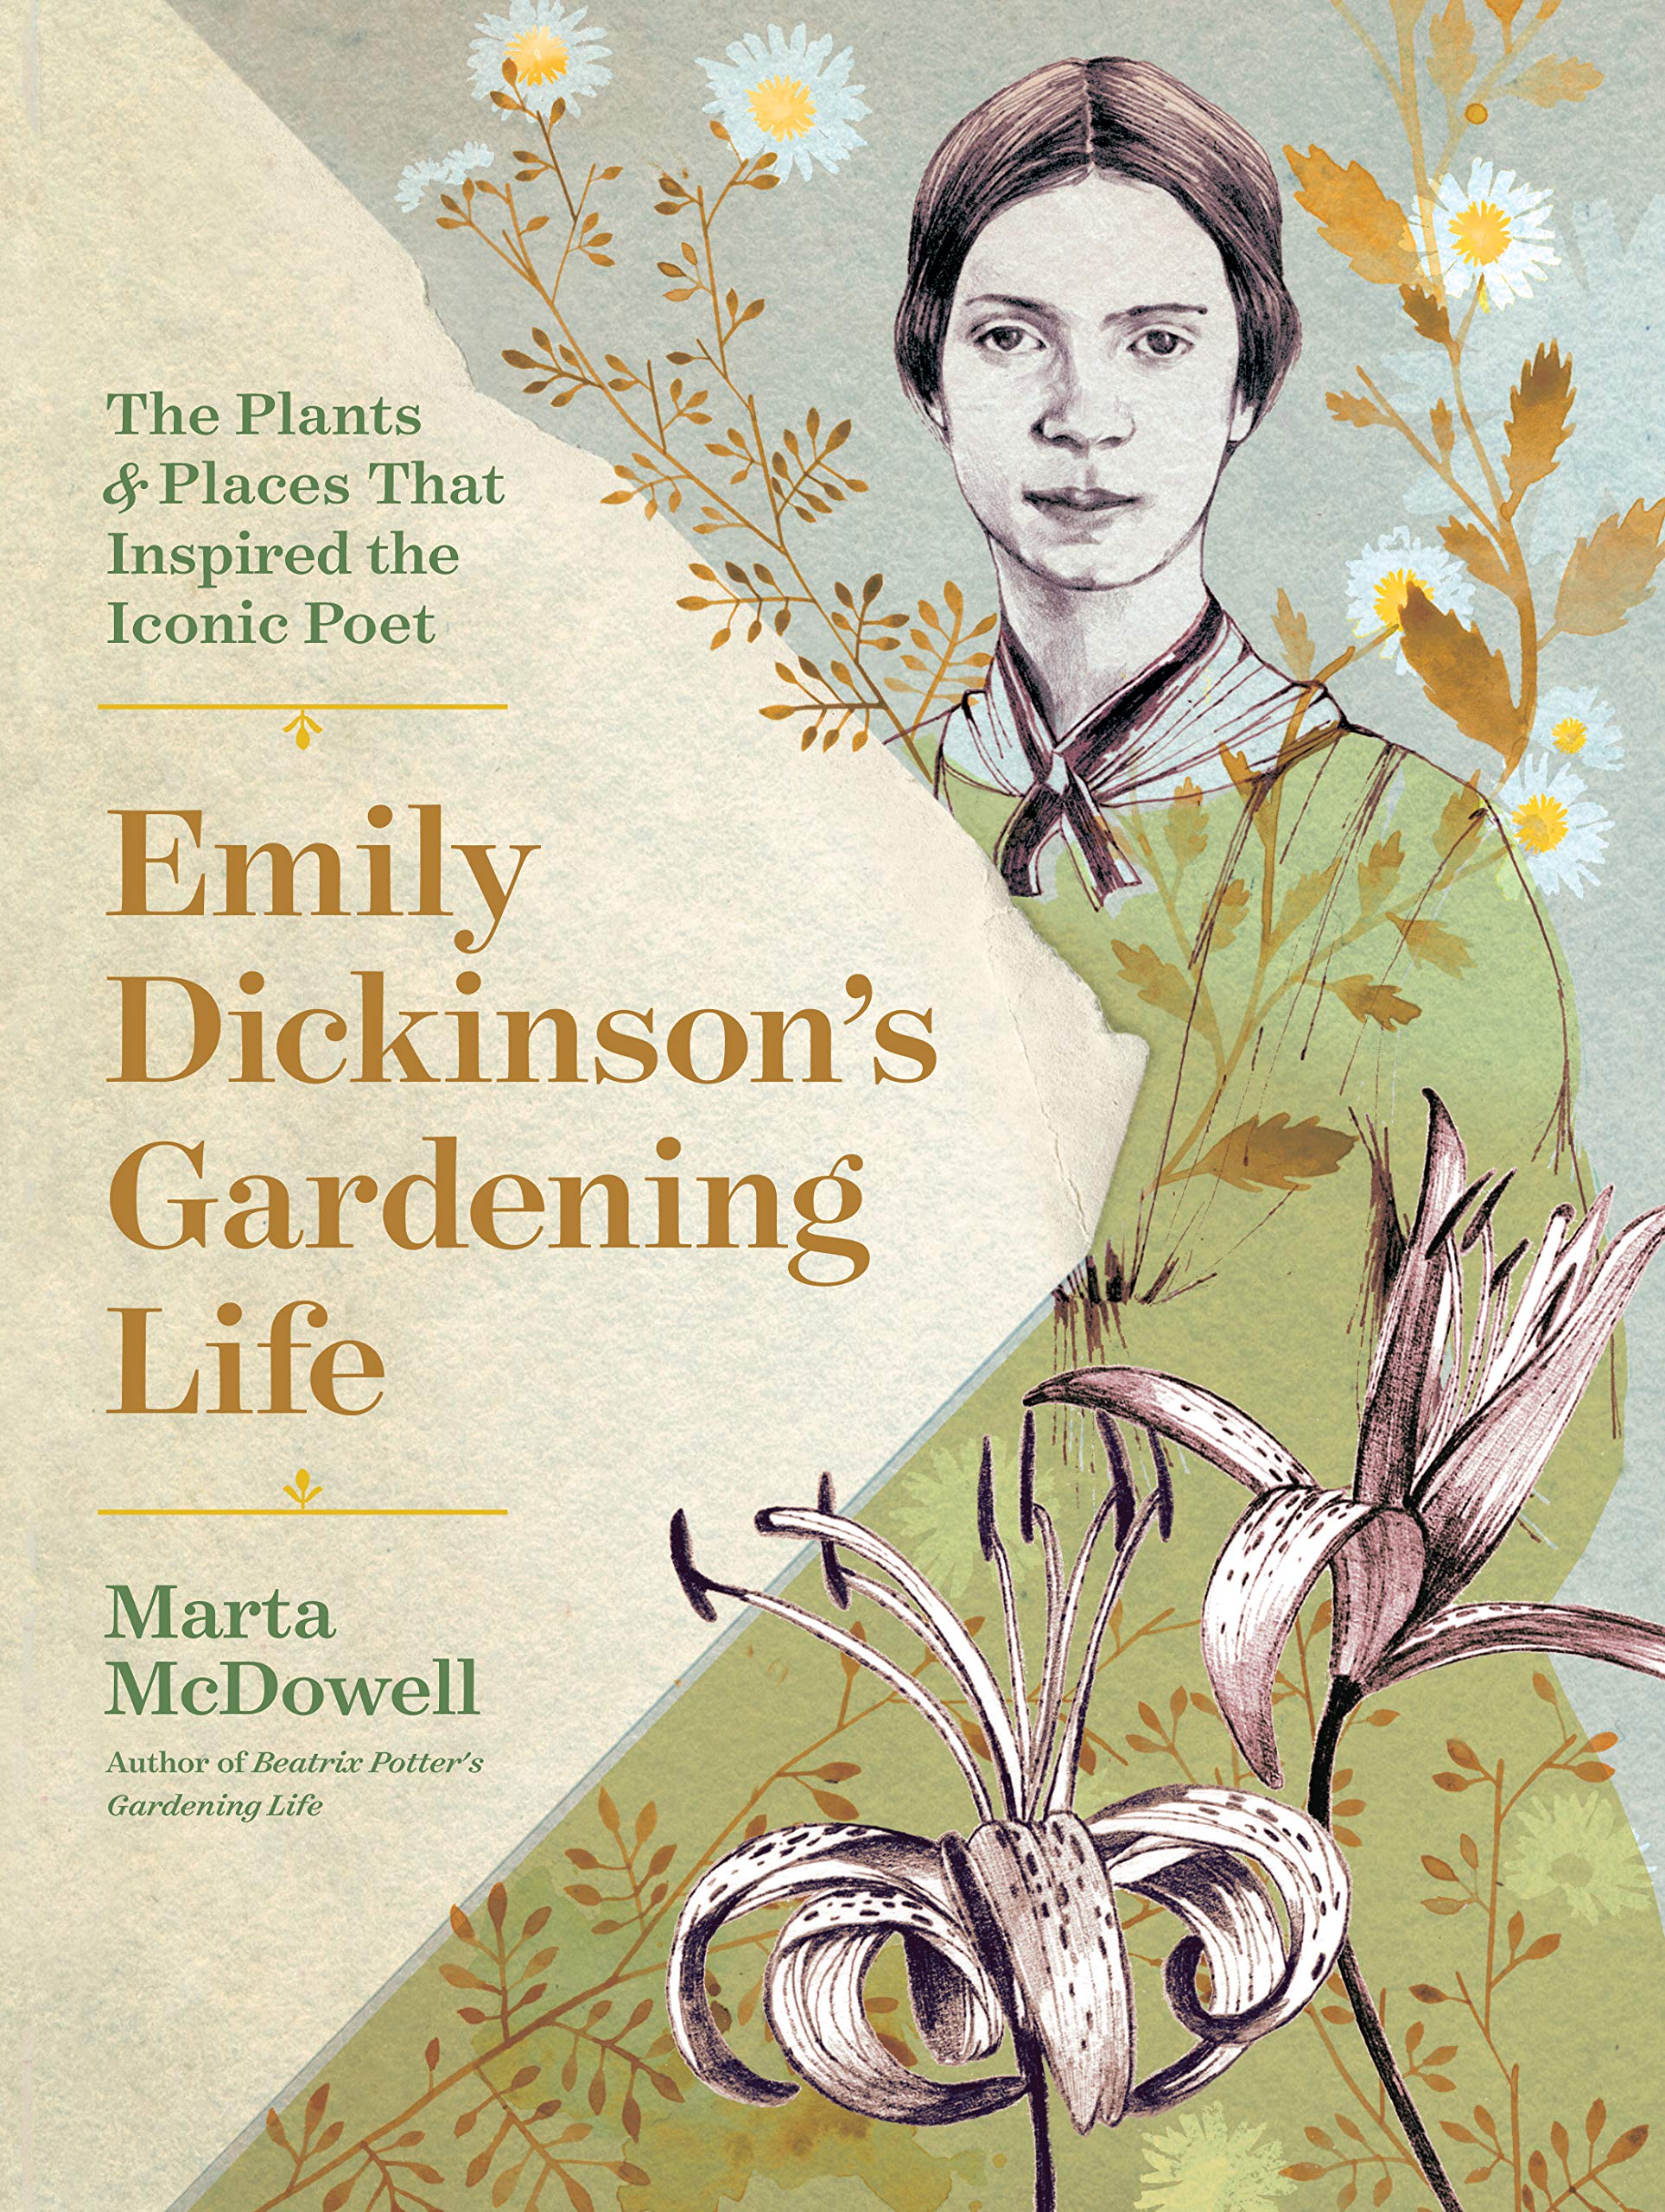 Book cover with a colored line illustration of Emily Dickinson with the title 'Emily Dickinson's Gardening Life' by Marta Mcdowel